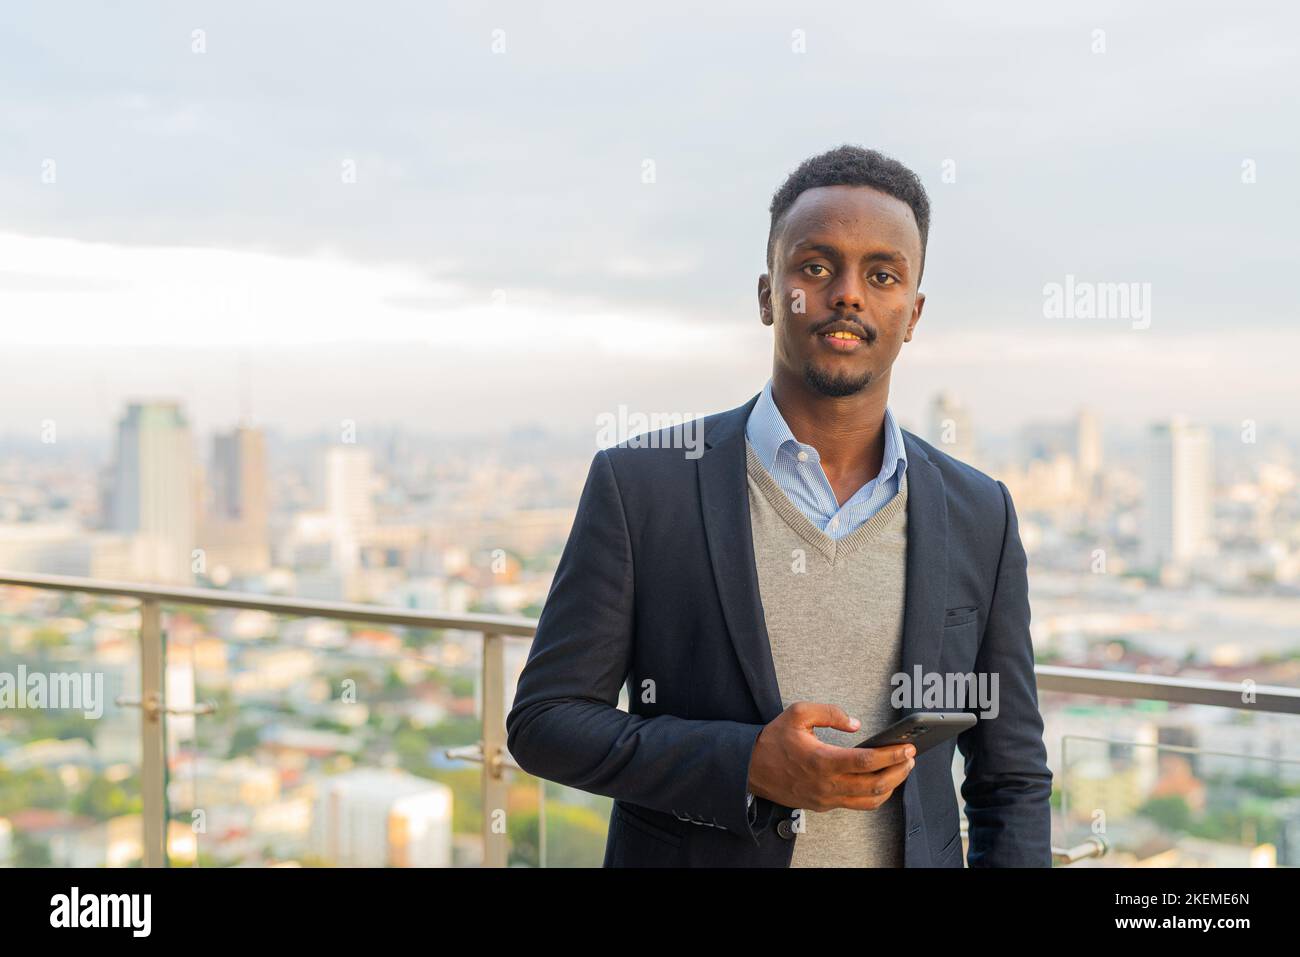 Portrait of handsome black African businessman wearing suit and holding smart phone Stock Photo